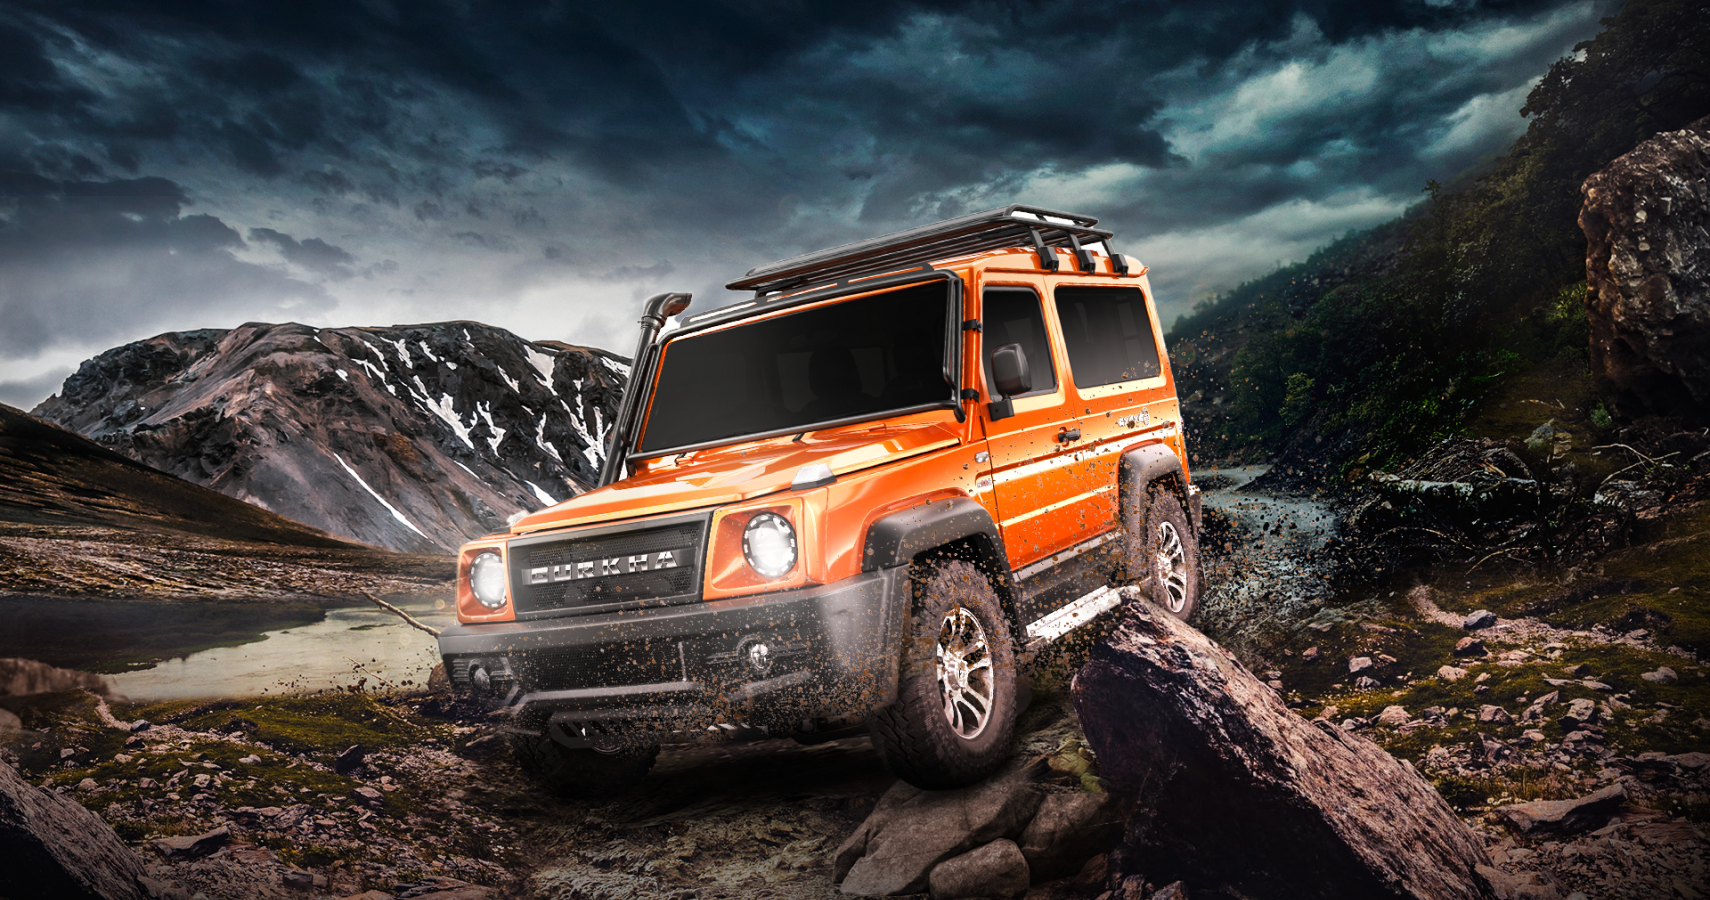 The Force Gurkha Is A Highly Capable Off-Roader From India